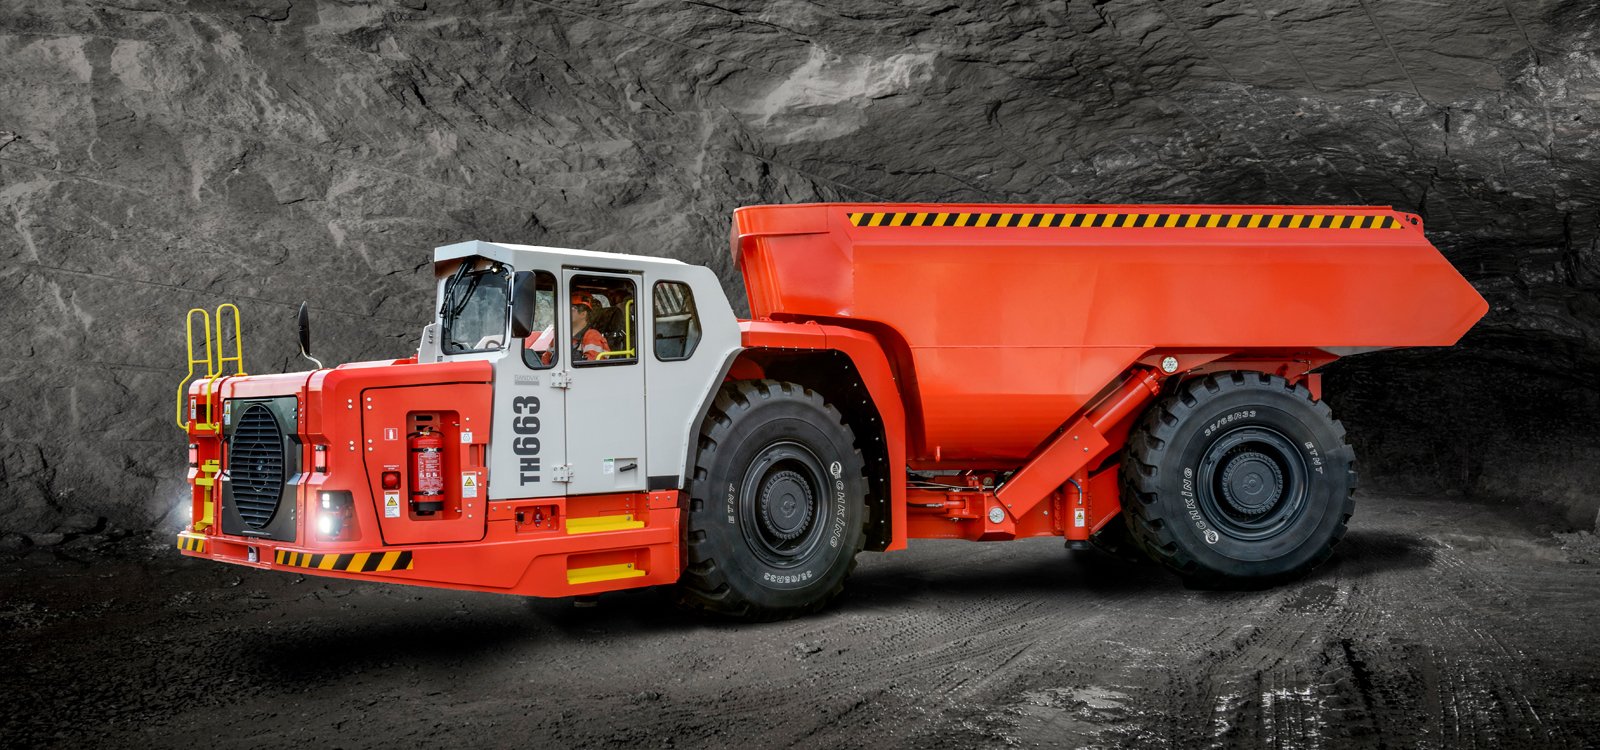 <p>Australia’s FMR Investments chose financing from Sandvik when it purchased a new fleet of trucks for its Eloise site.</p>
